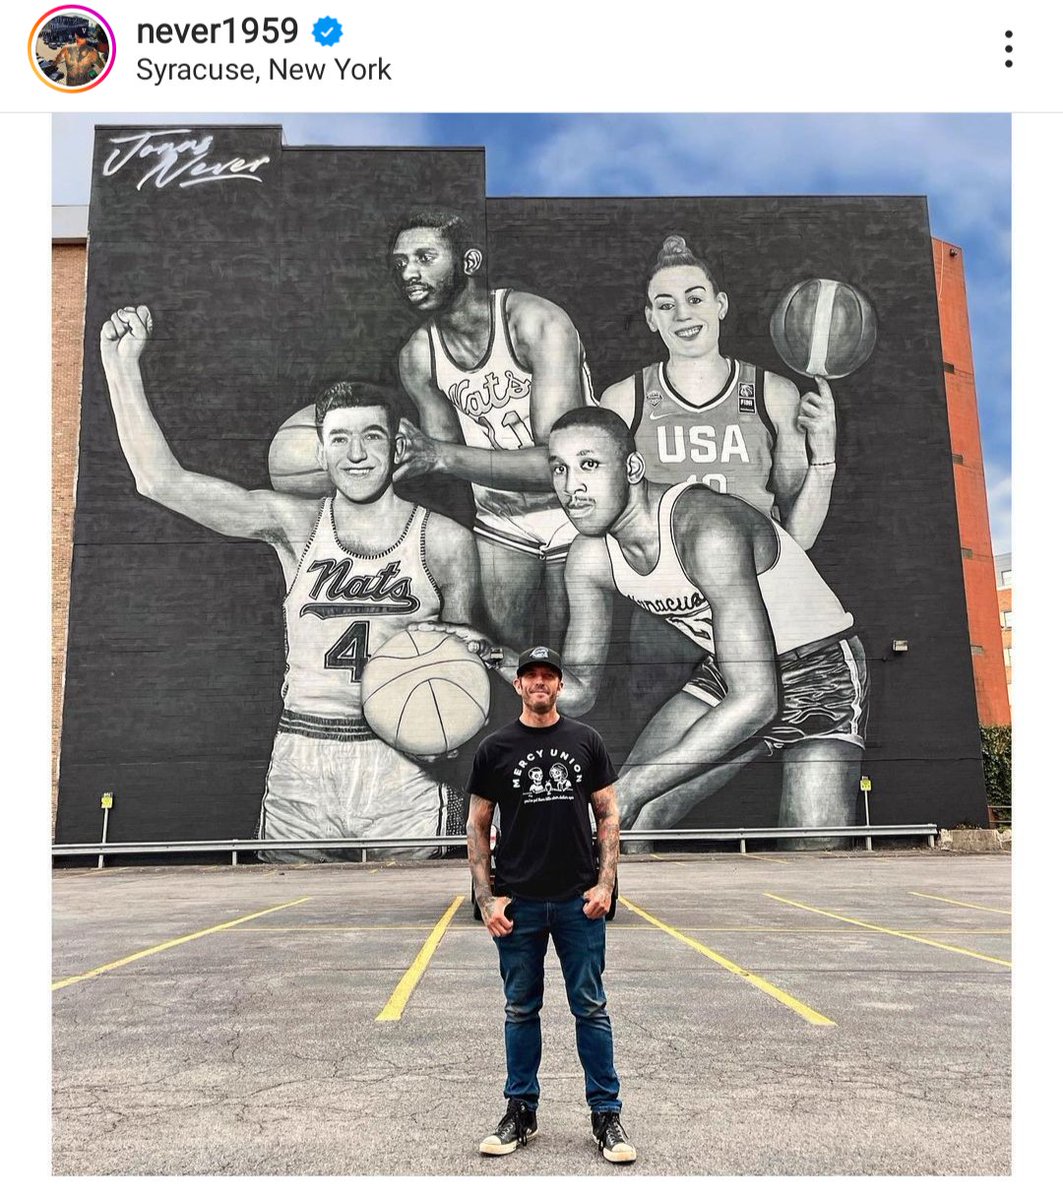 Check out the Syracuse Chiefs cap on the famous LA artist who completed Syracuse's new basketball mural. #ChiefsForever https://t.co/vUB00rclZe